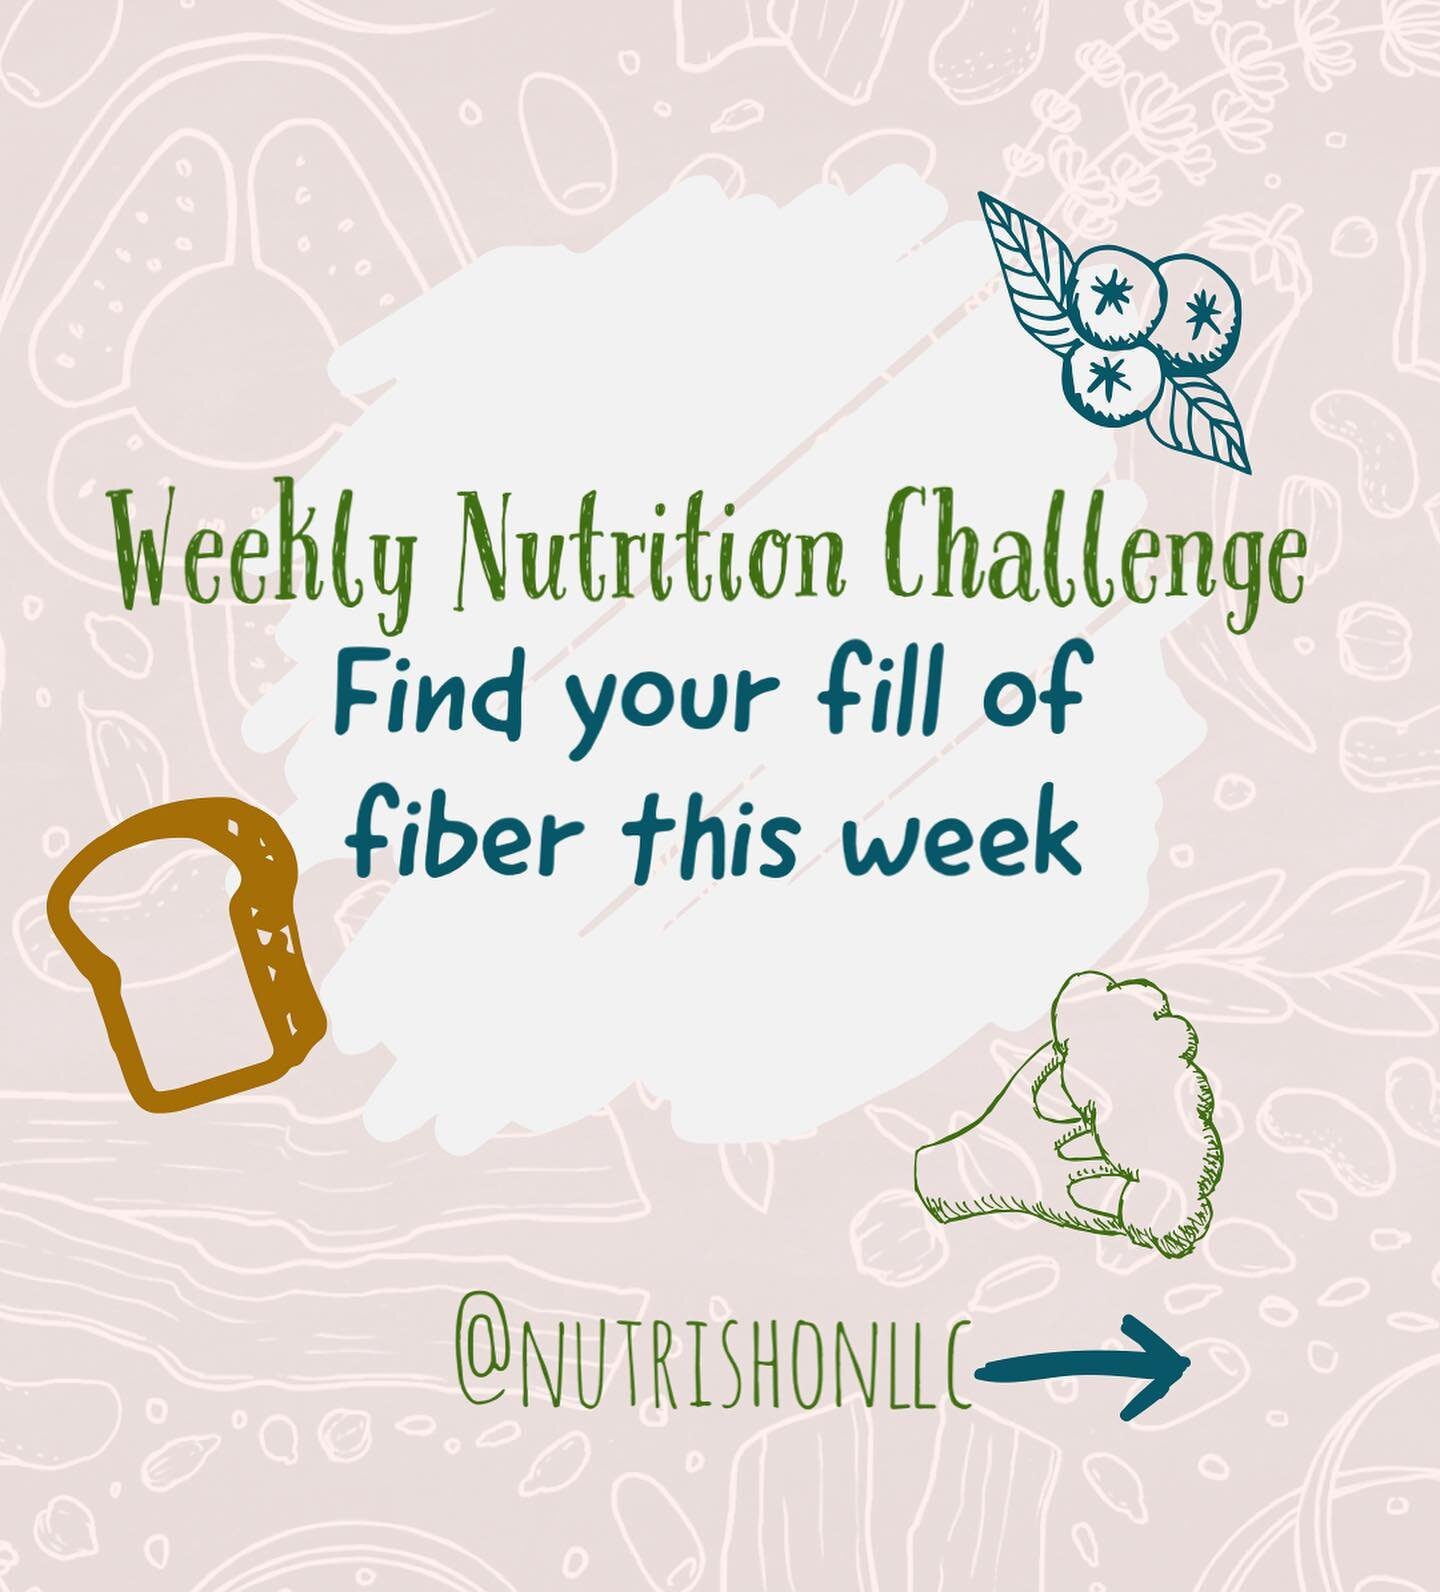 &ldquo;❤️&rdquo; this post to accept the challenge!

Fiber, fiber, fiber! And I cannot stress this enough&hellip;FIBER! 

Fiber is so good for you! It helps move things along in your digestive tract, it fuels your healthy gut bacteria (which can help